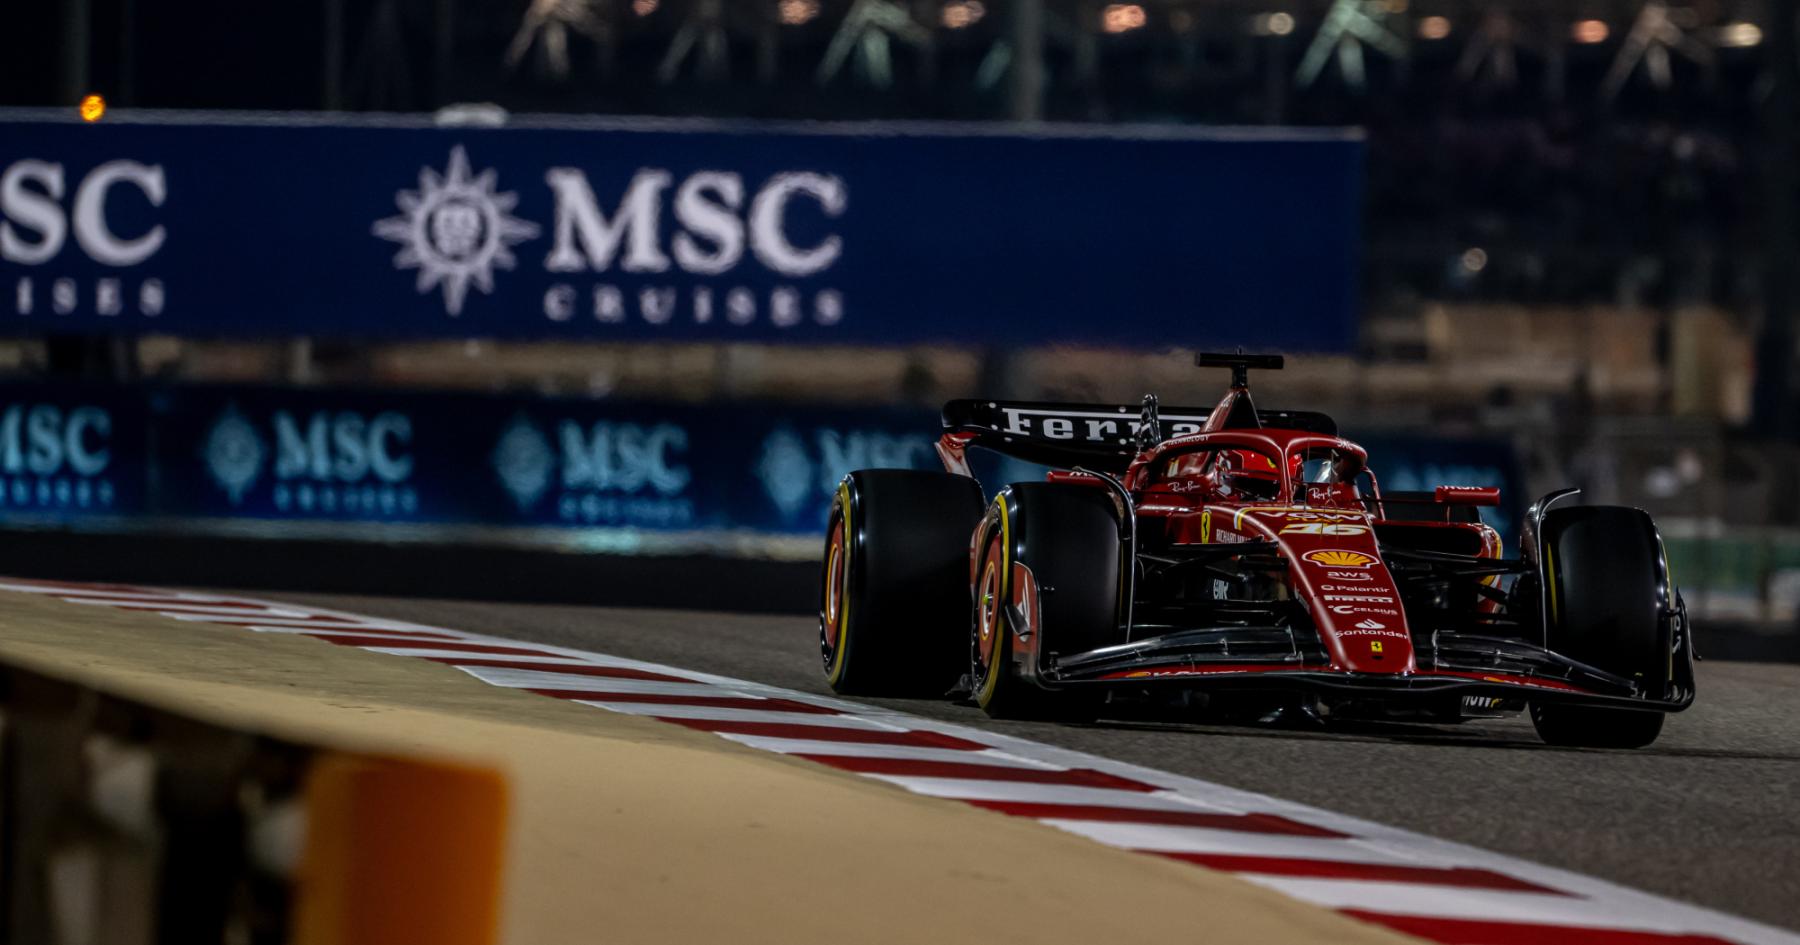 Leclerc's Brake Woes Dash Red Bull's Hopes of a Competitive Battle